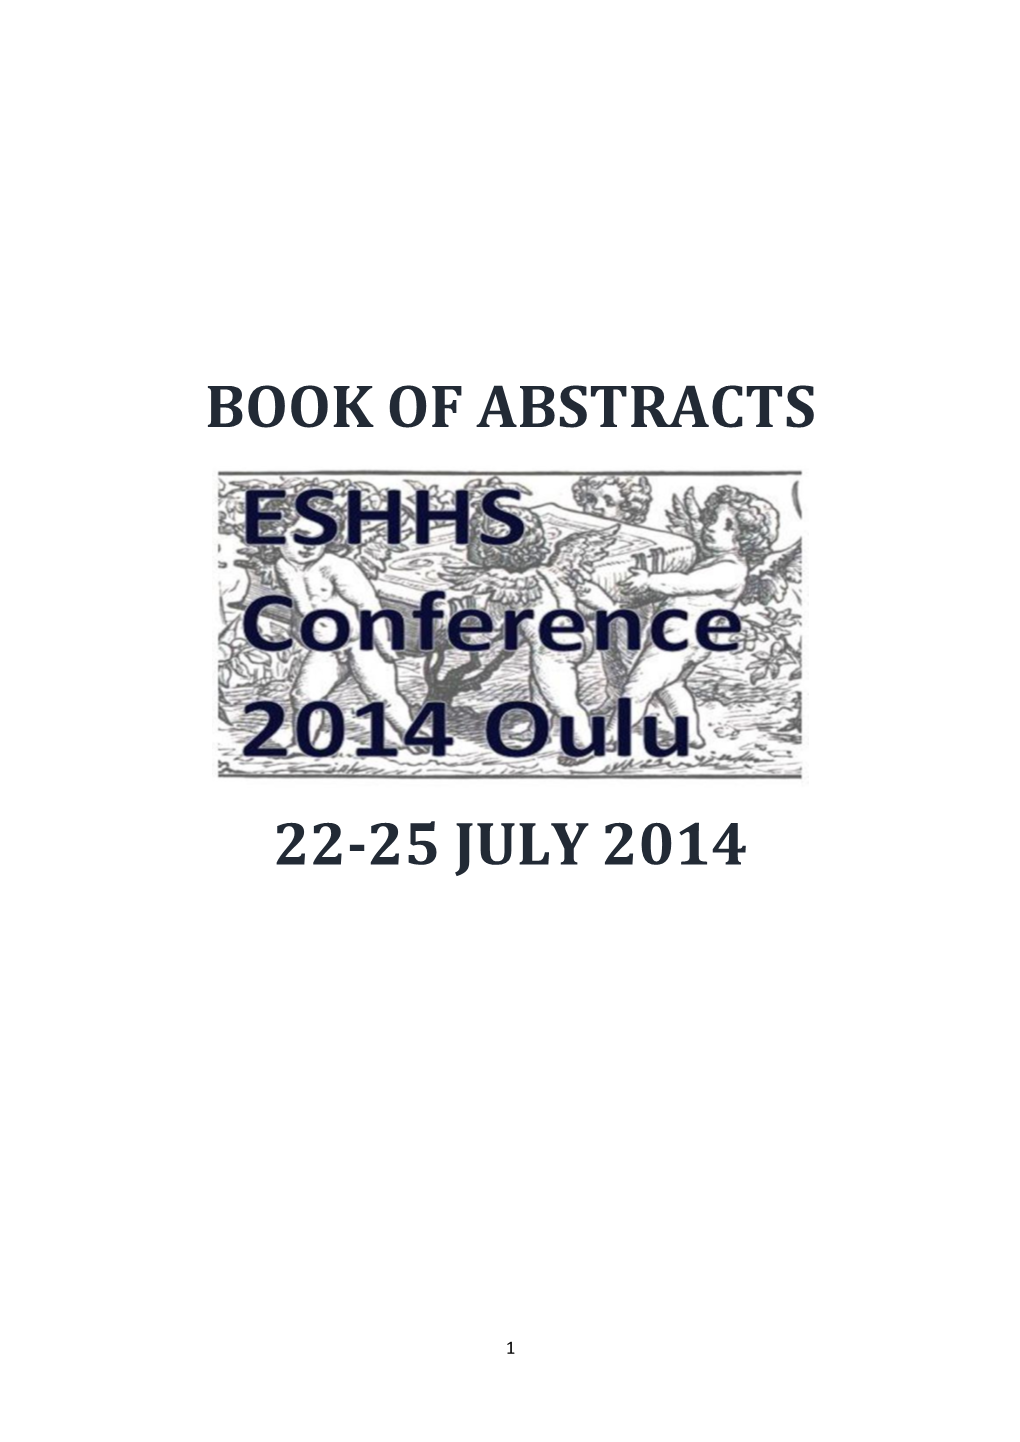 Book of Abstracts 22-25 July 2014